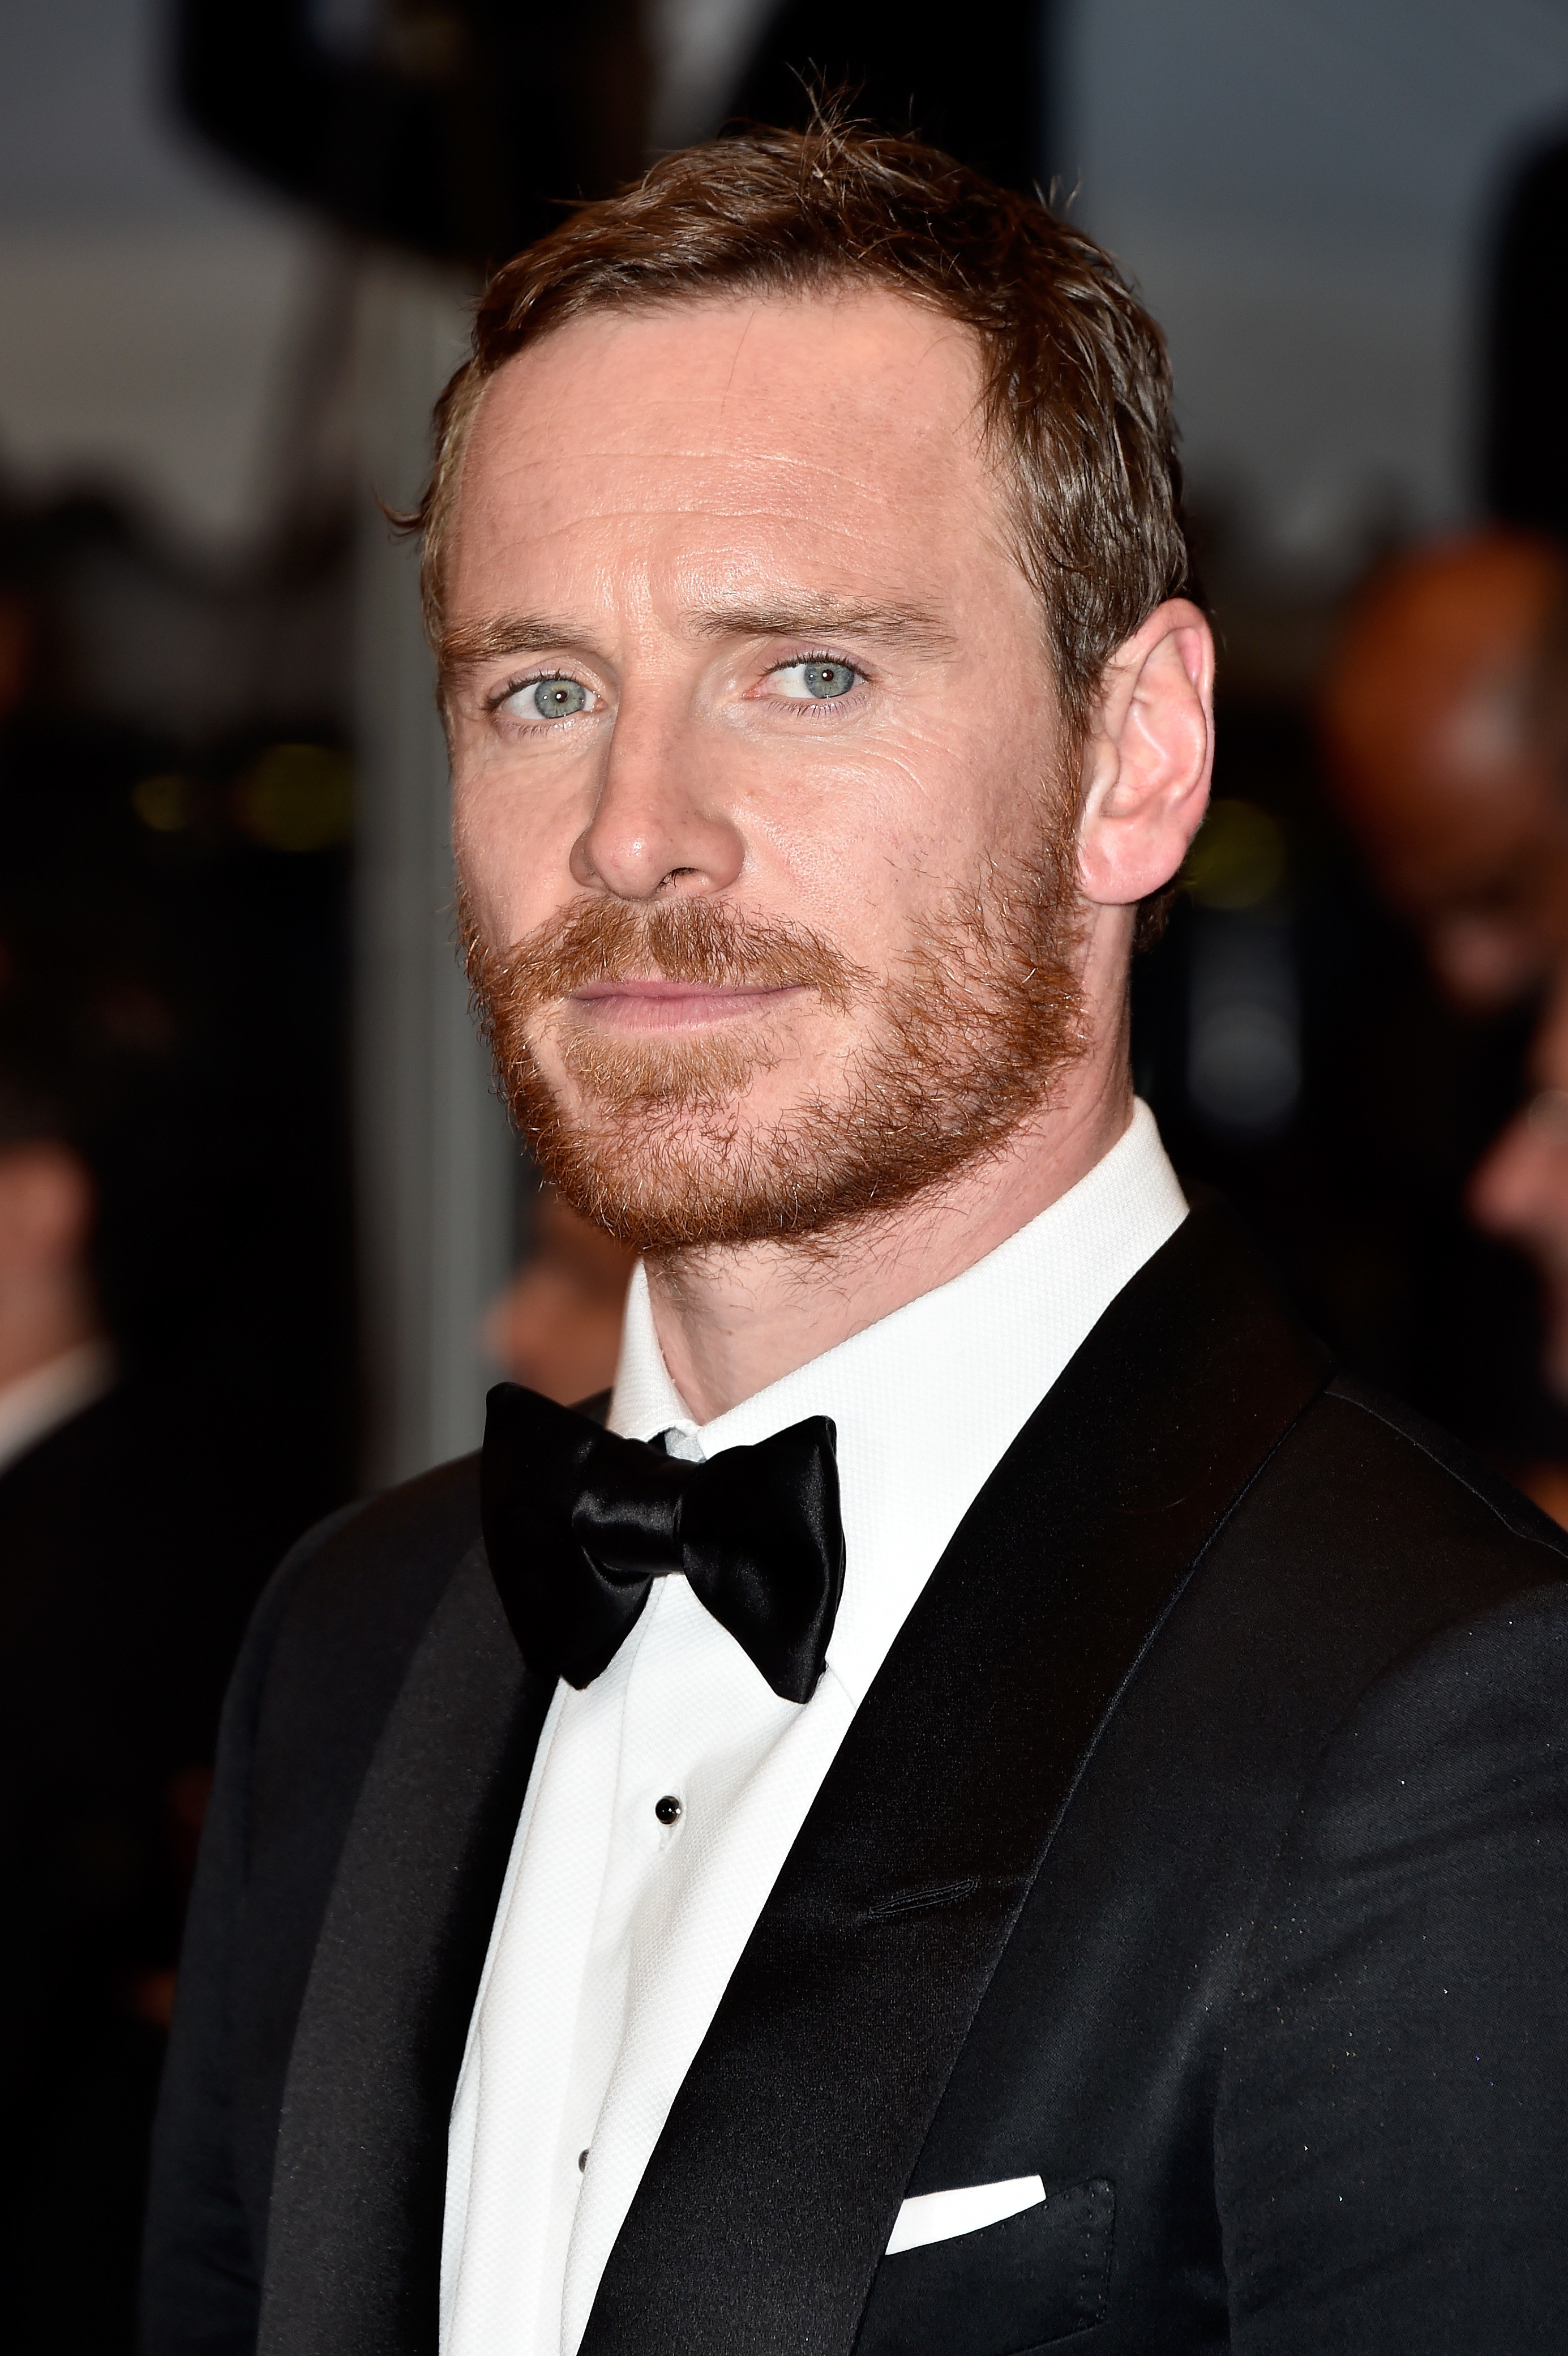 Fassbender in a tux on the red carpet